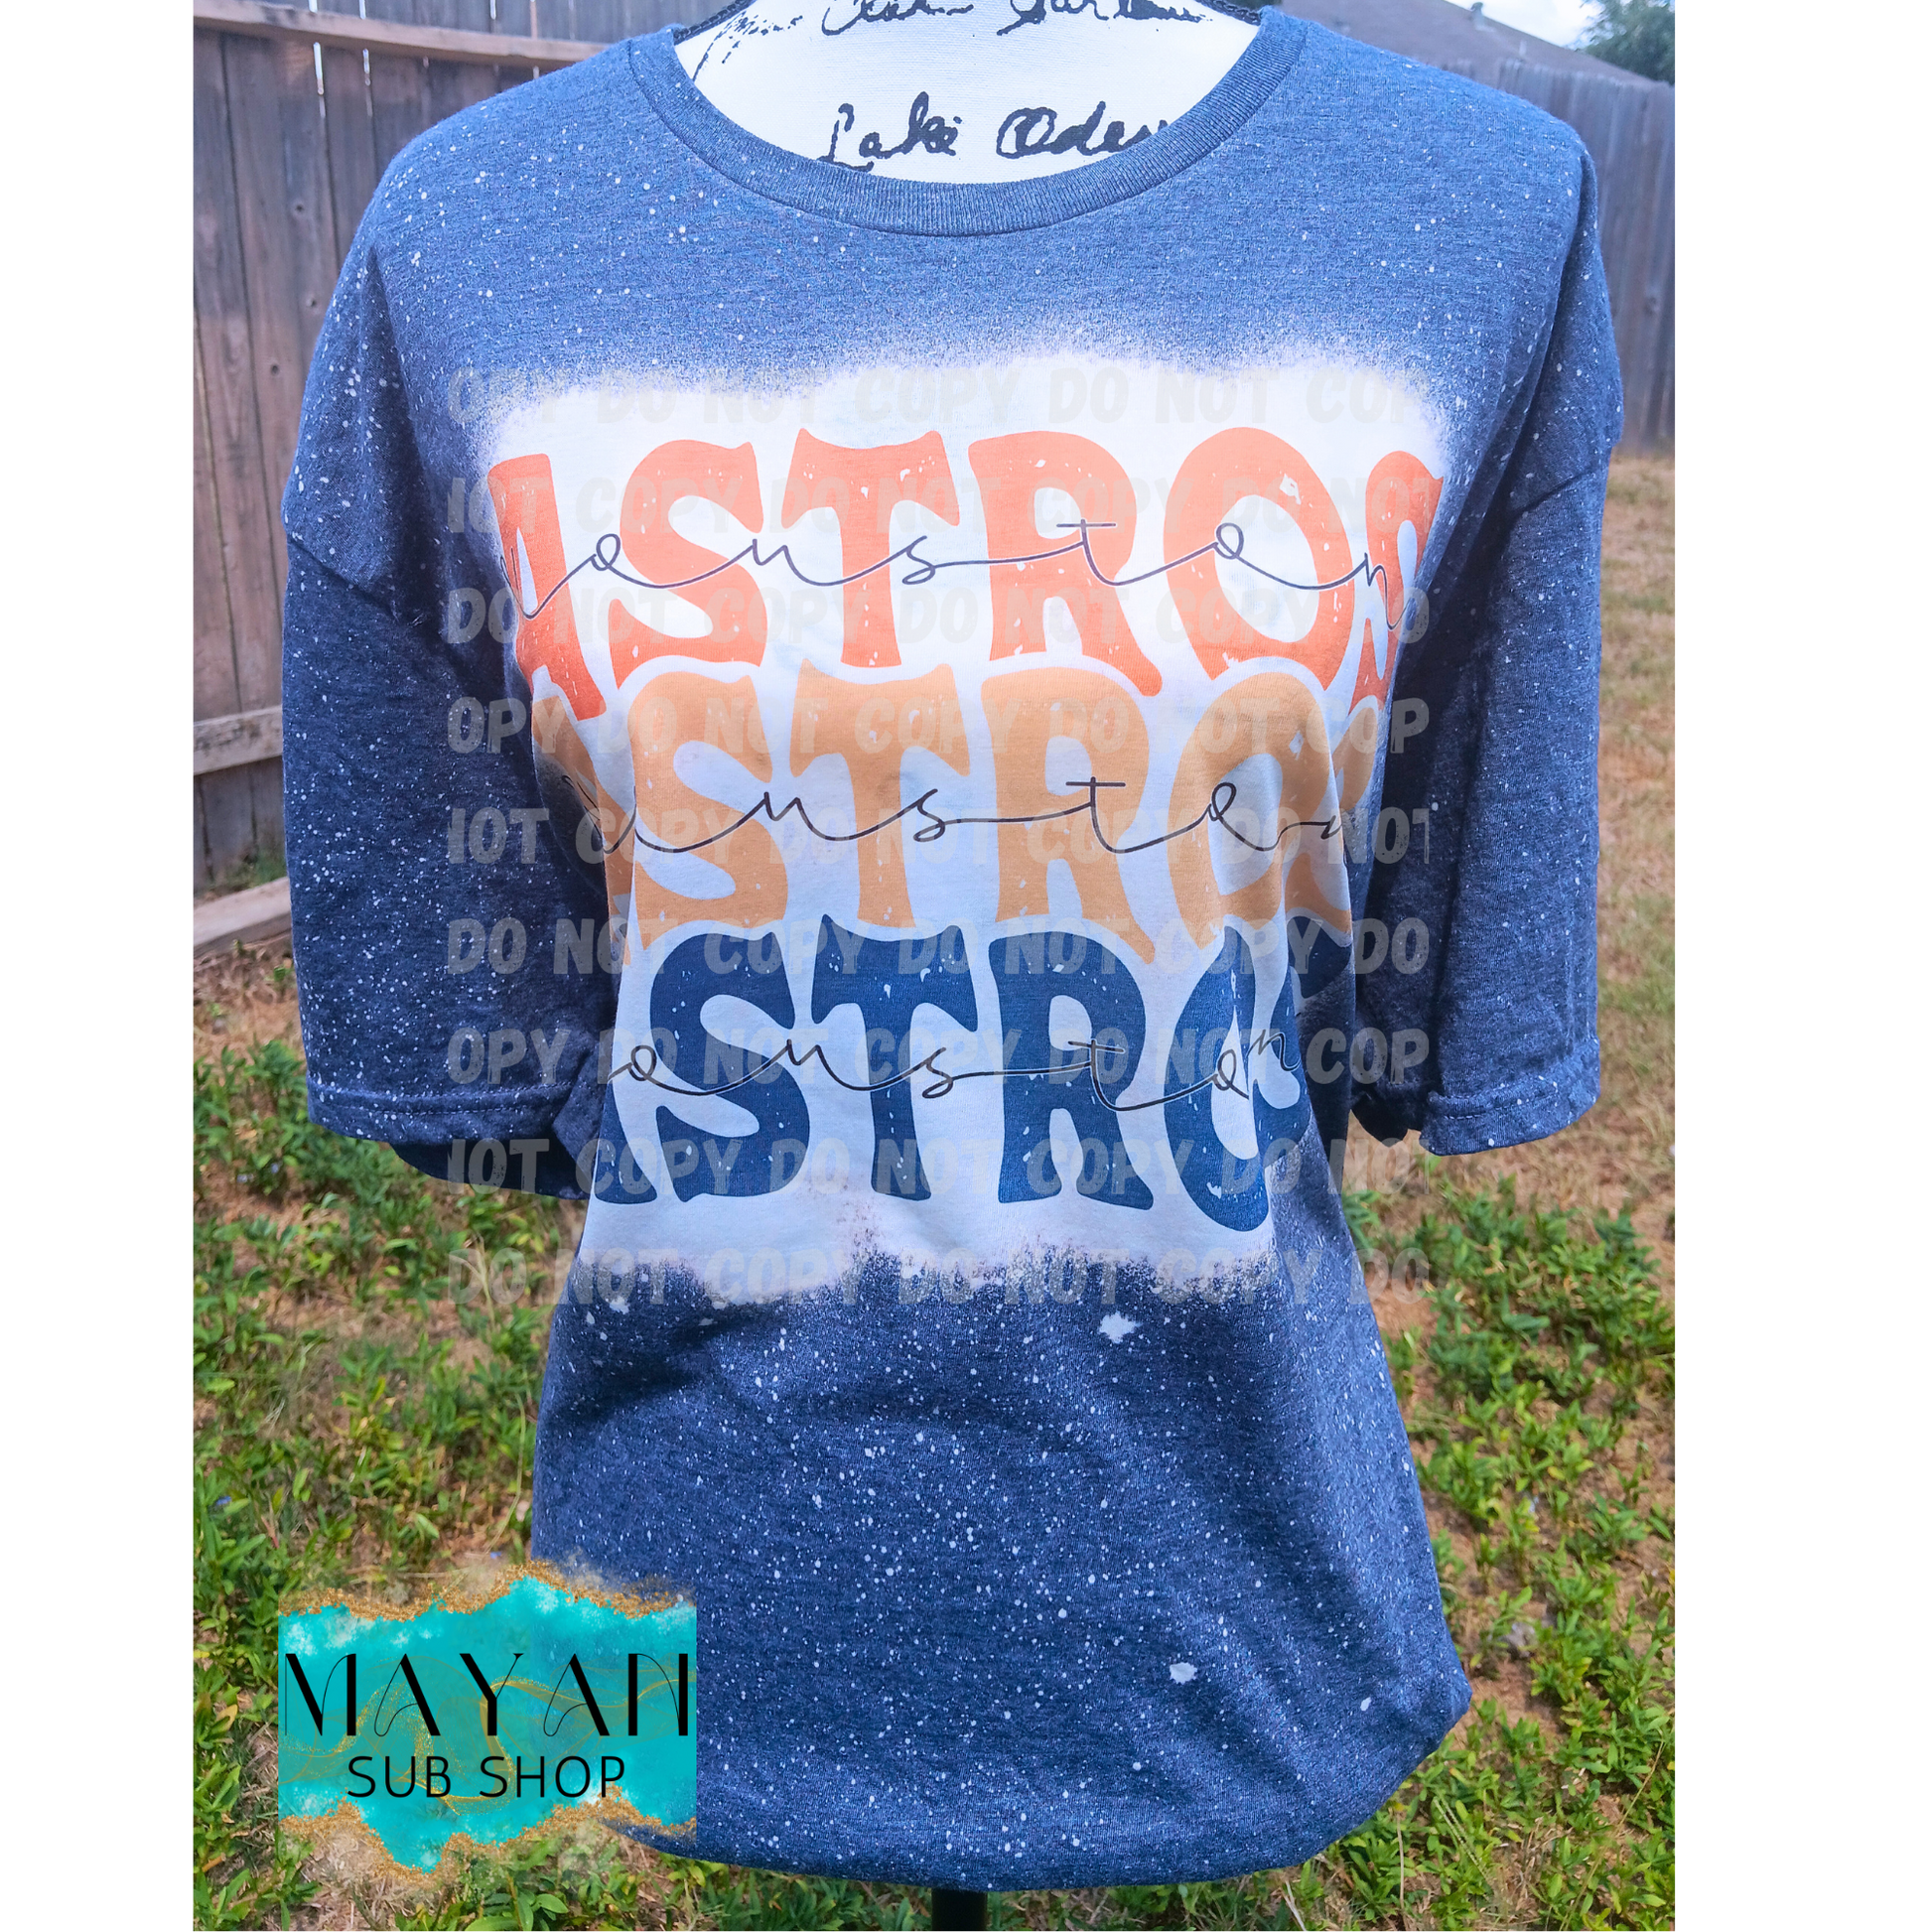 Astros stacked in heather navy bleached shirt. -Mayan Sub Shop